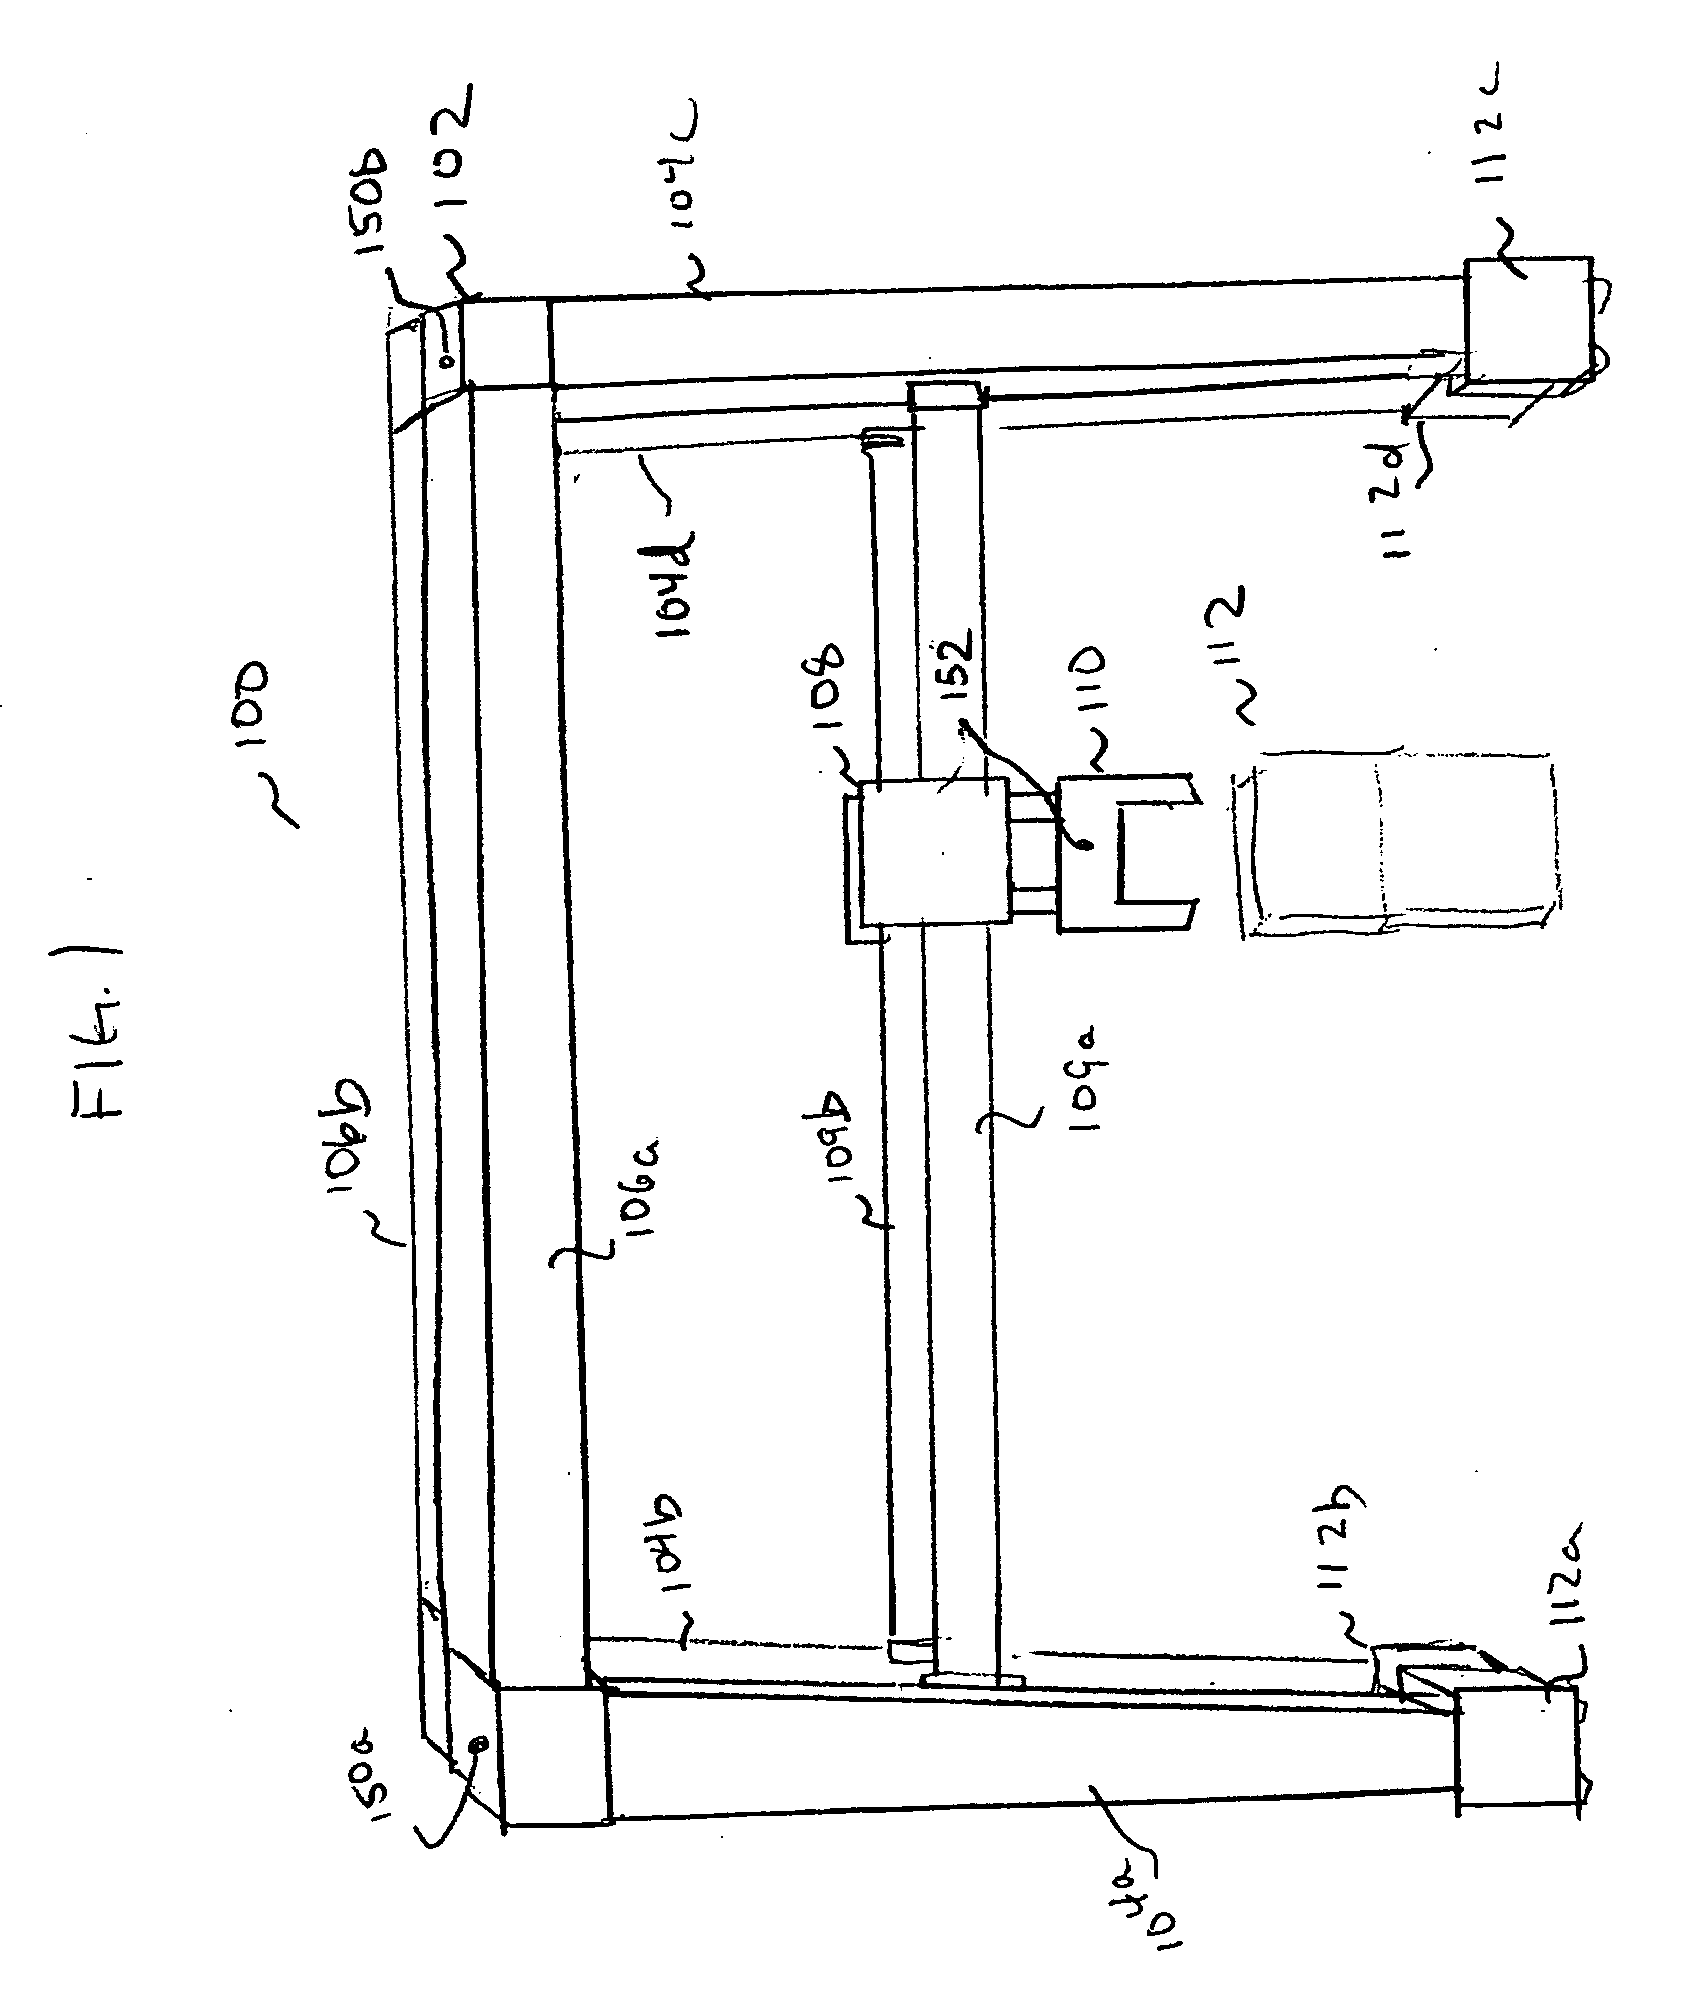 Method and apparatus for gantry crane sway determination and positioning